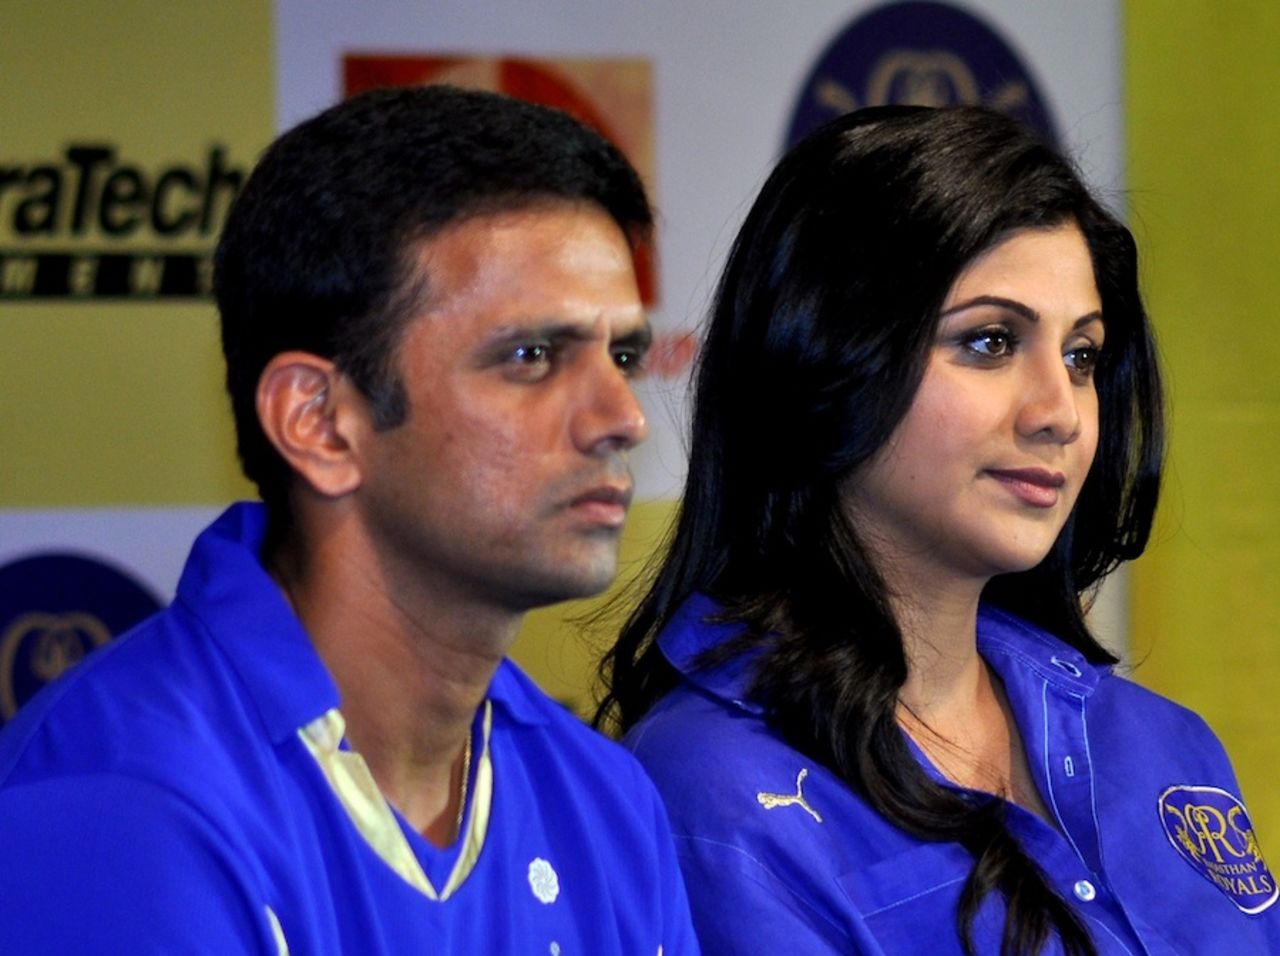 Rahul Dravid and Shilpa Shetty at the unveiling of Rajasthan Royals' new jersey, Mumbai, March 5, 2012